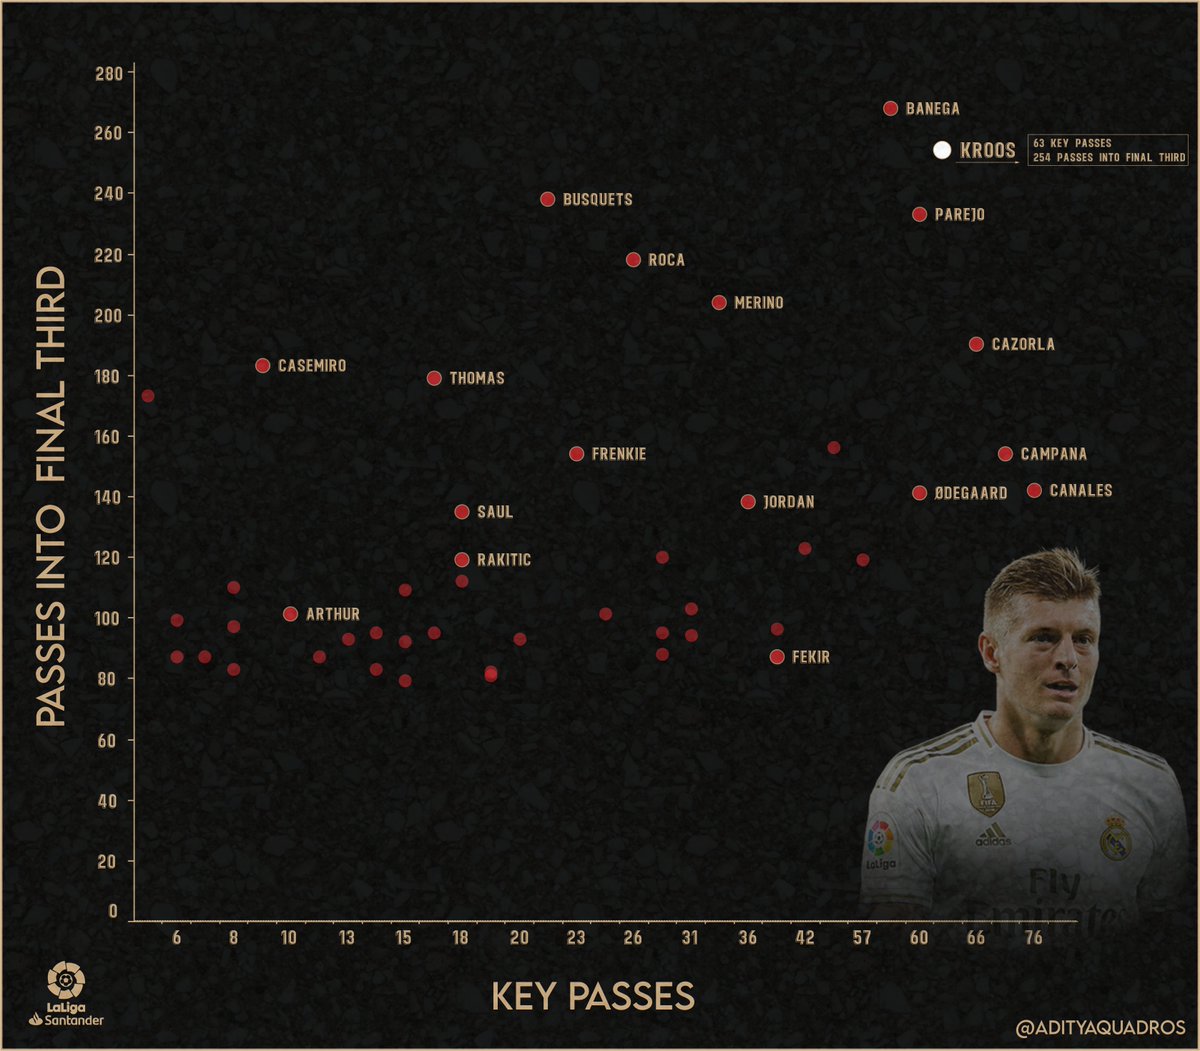 Toni ranked among the best in the league among midfielders for passes into the final third and key passes. Here's a look at how he compares with the rest.